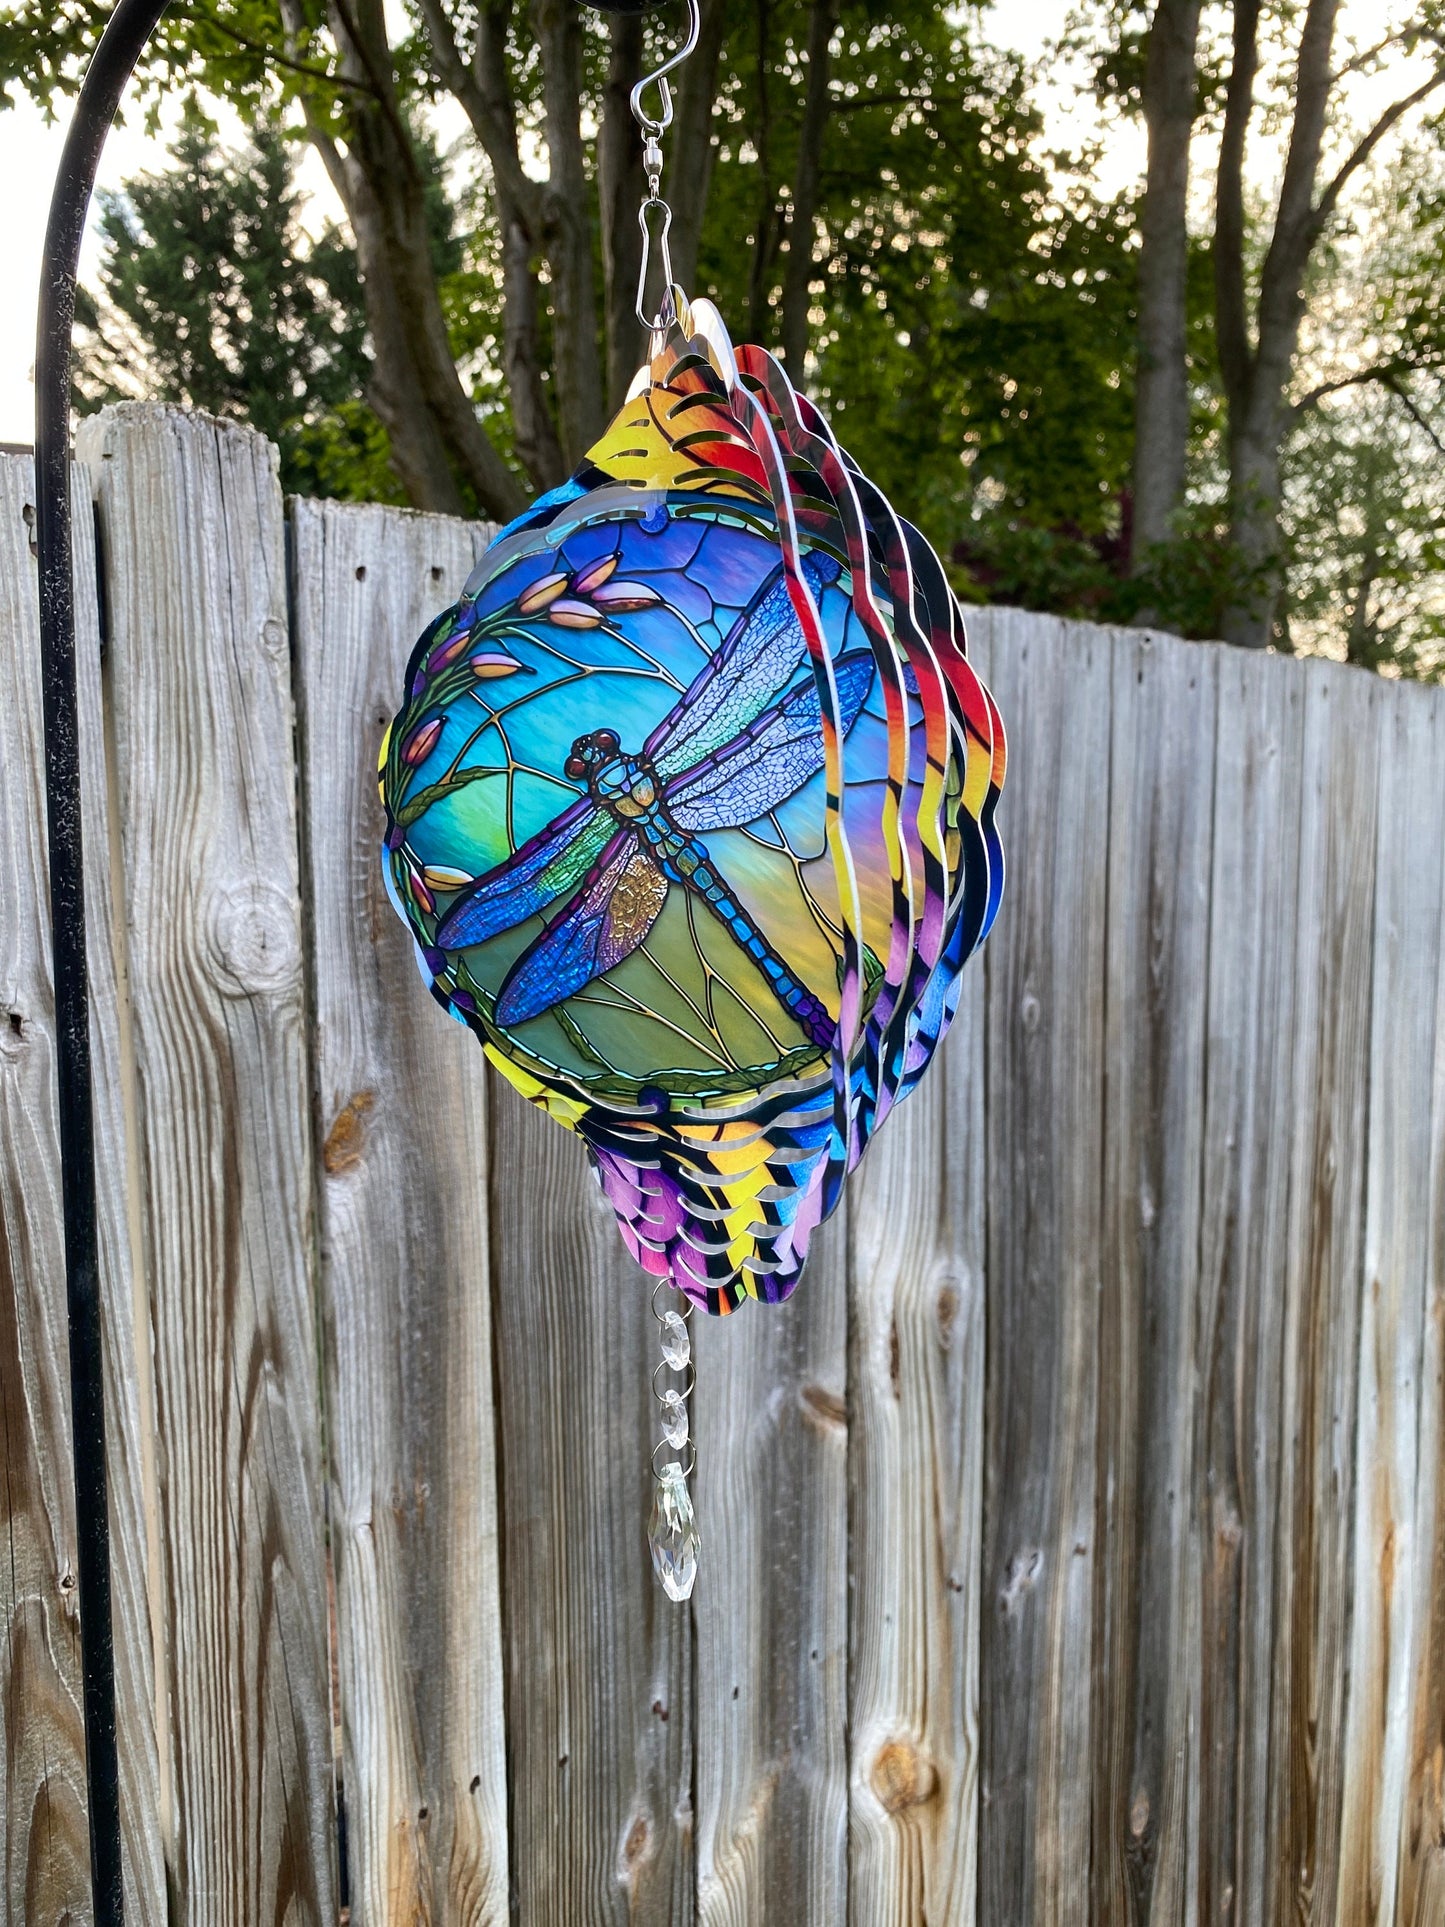 Colorful Stained Glass Look Dragonfly Wind Spinner, Gardener Gift metal Wind Catcher, Dragonfly Gifts, Hanging Porch Decor Sun Catcher